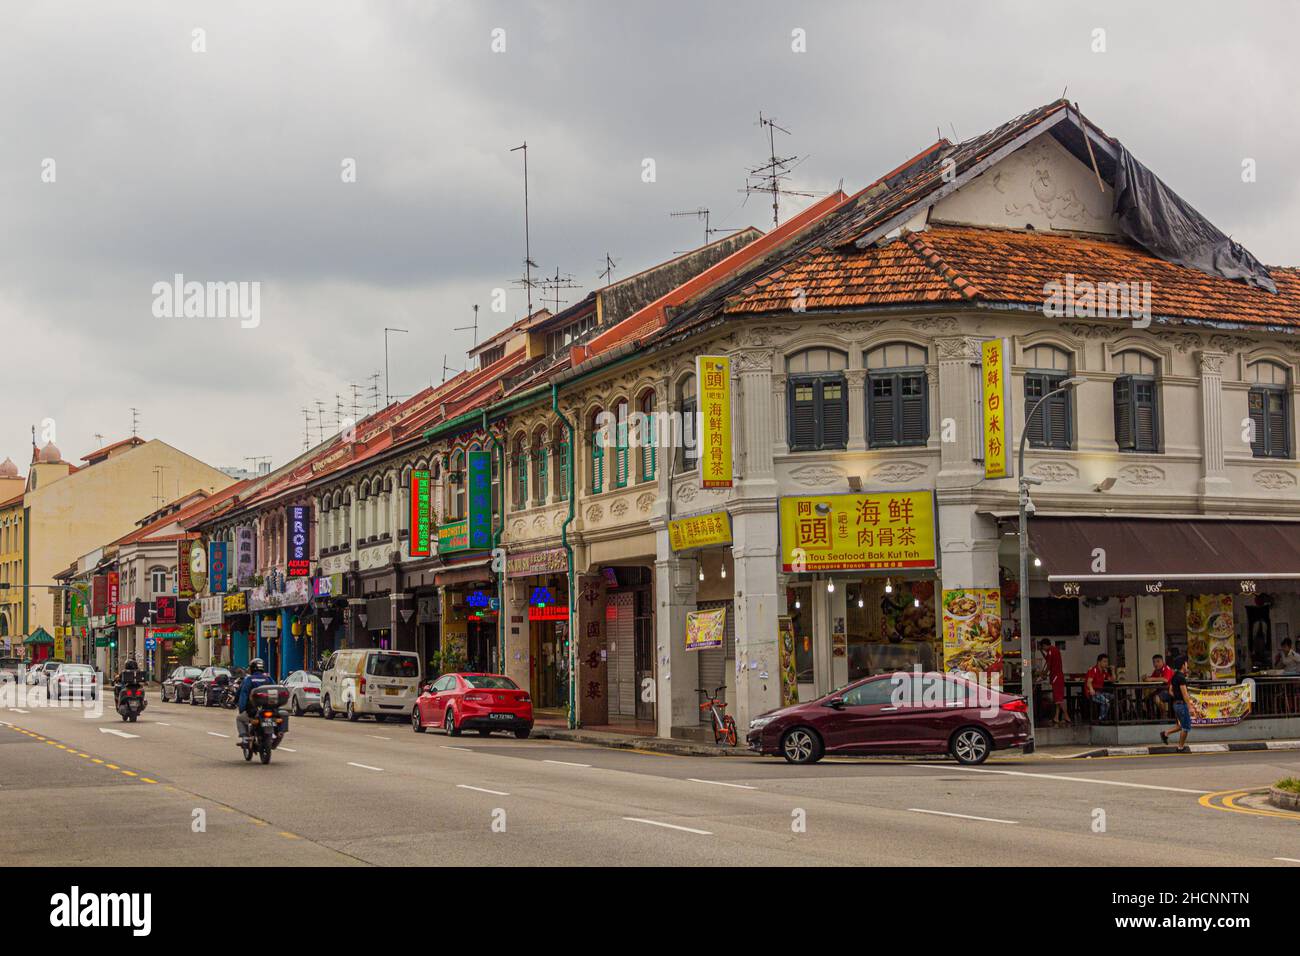 SINGAPORE, SINGAPORE - MARCH 10, 2018: View of Geylang Road in Singapore. Stock Photo